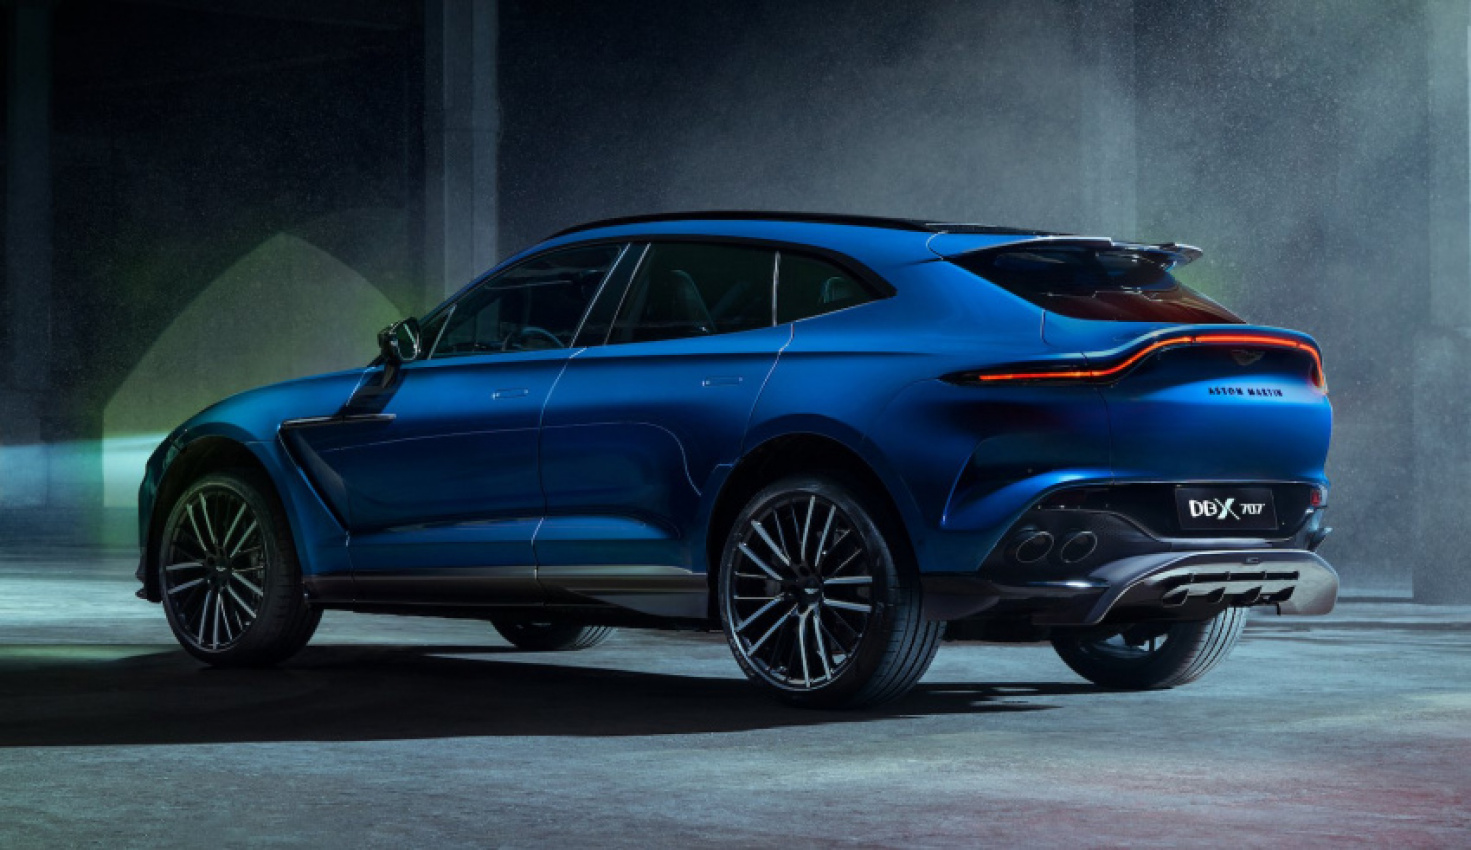 aston martin, cars, industry news, 2022 aston martin dbx707: price, specs and release date